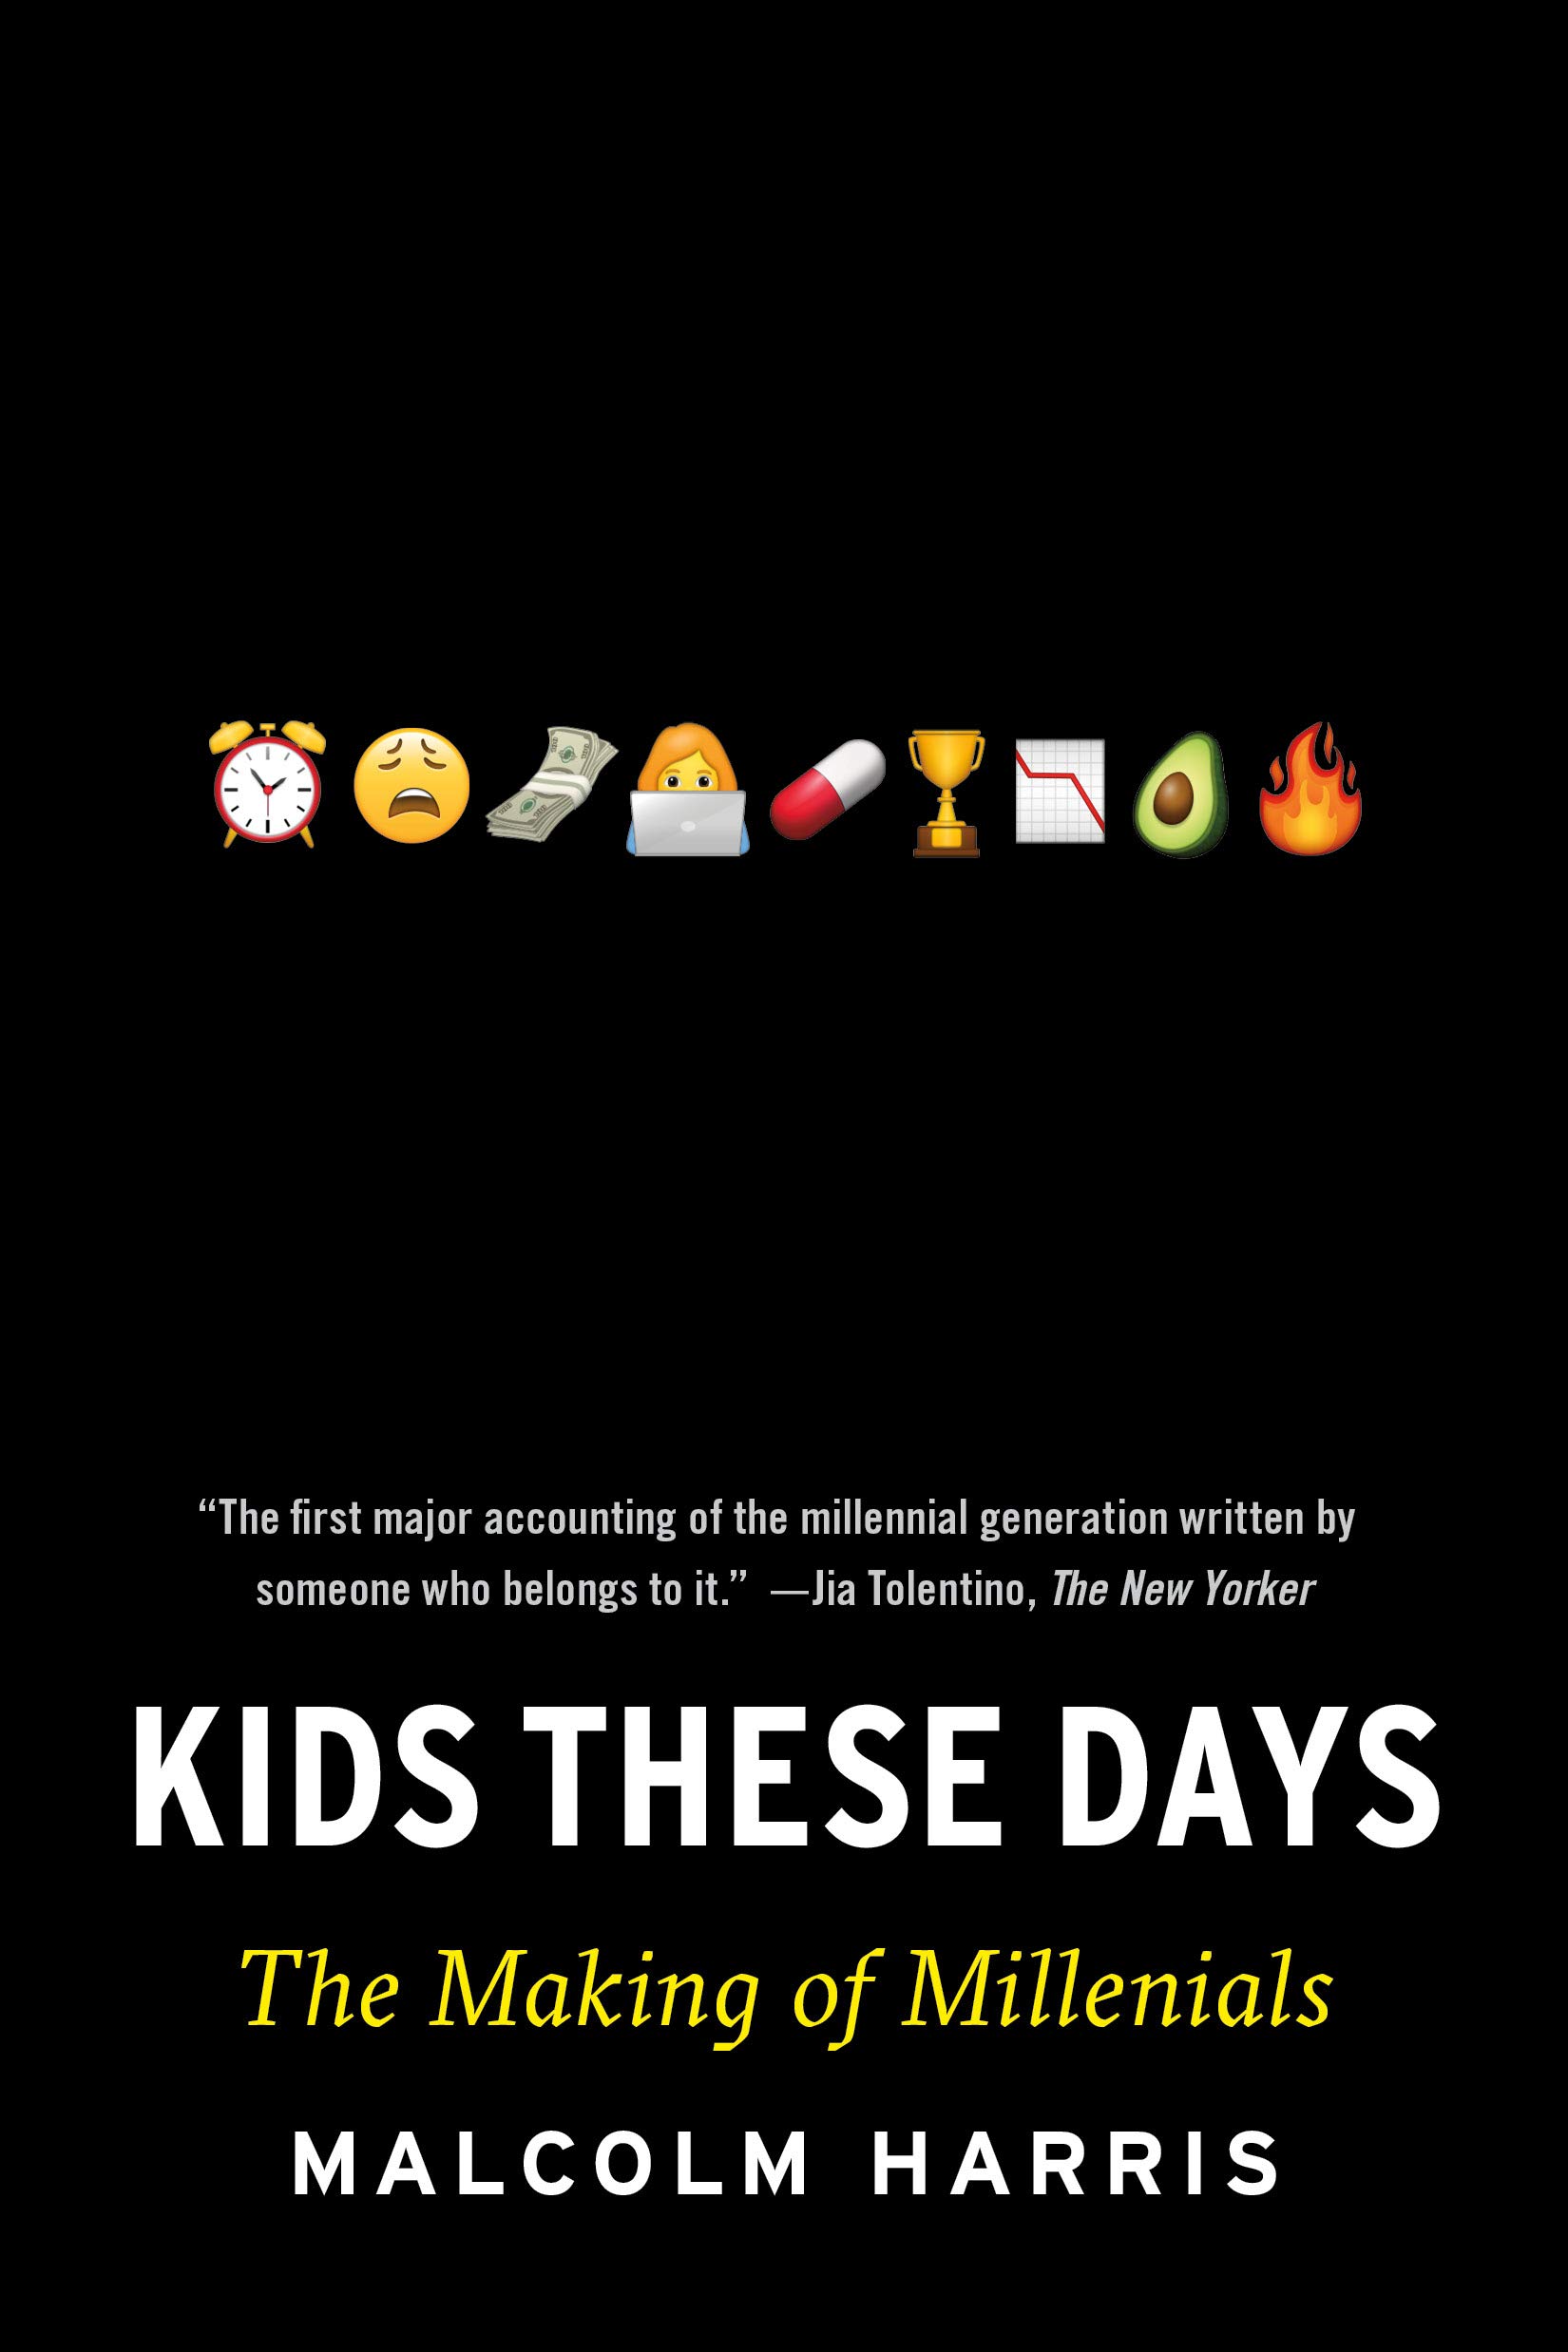 'Kids These Days: Human Capital and the Making of Millennials' by Malcolm Harris